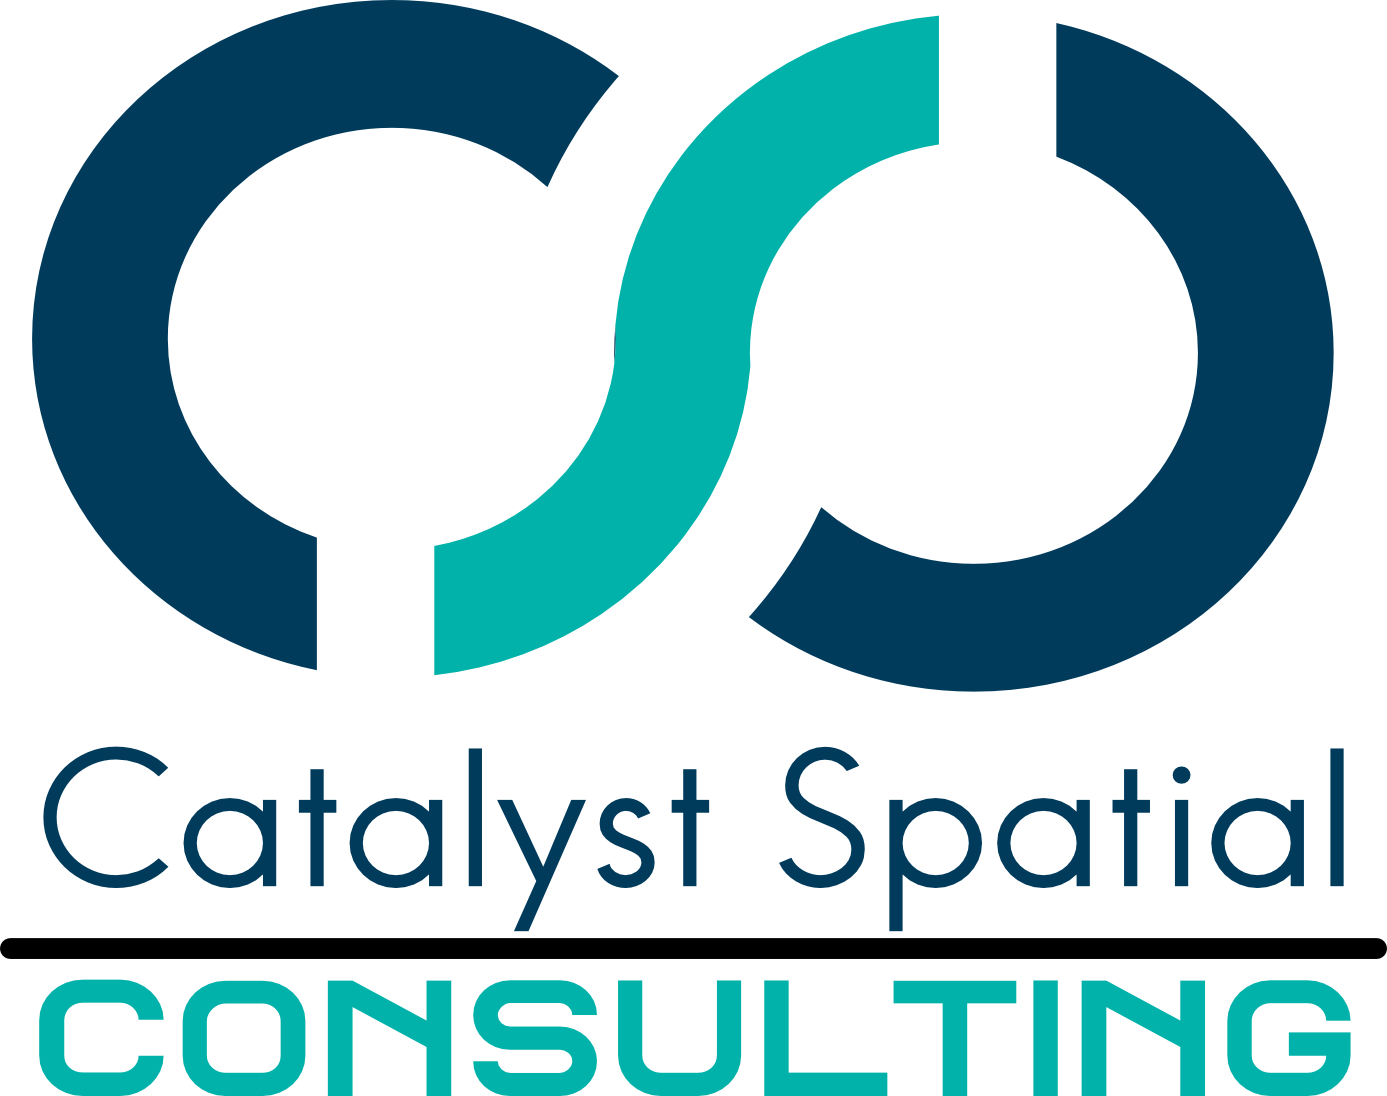 Catalyst Spatial Consulting